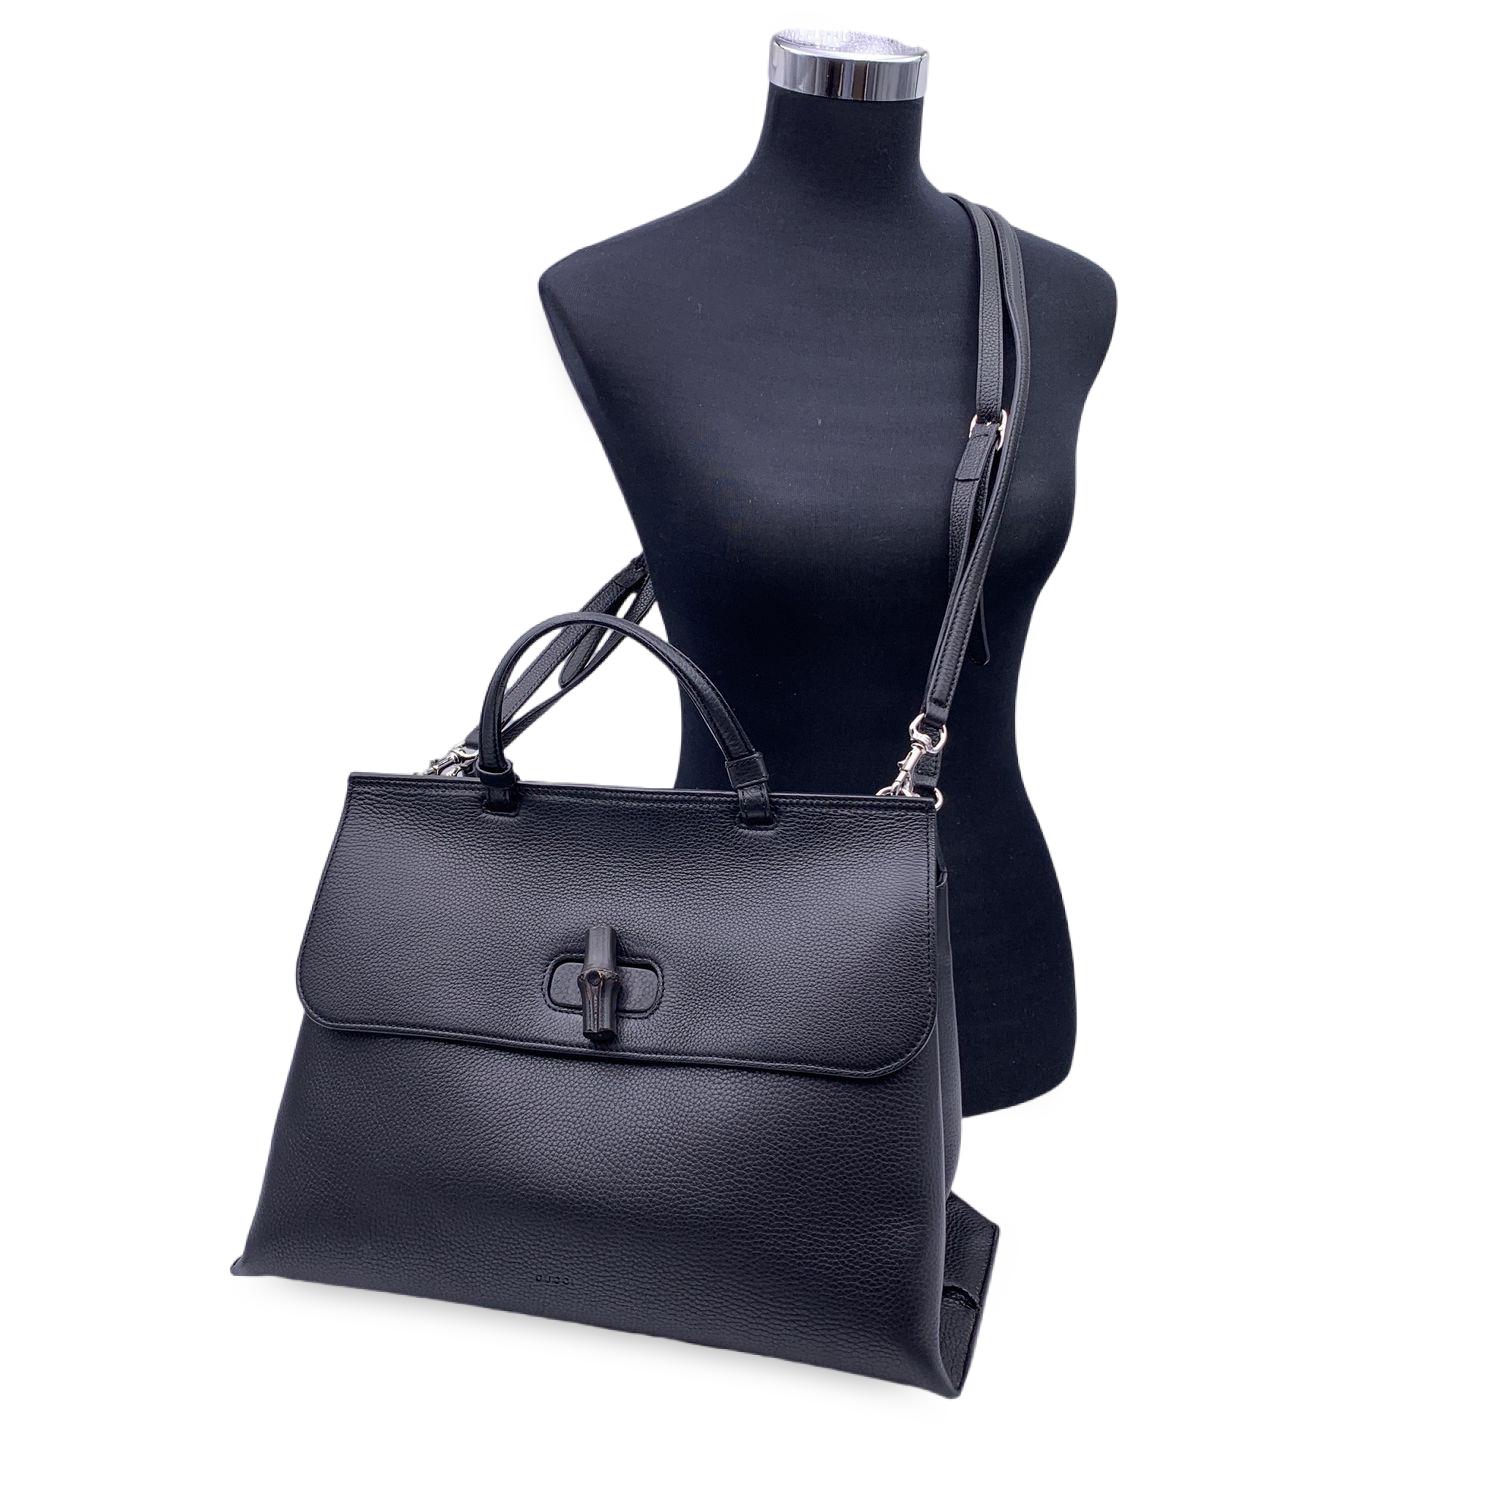 Beautiful Gucci 'Daily Bamboo' in black leather. Flap closure with Bamboo twist closure on the front. Silver metal hardware.Top handle and adjustable and removable shoulder strap. Side magnetic detail. Beige fabric lining. 1 side zip pocket and 2